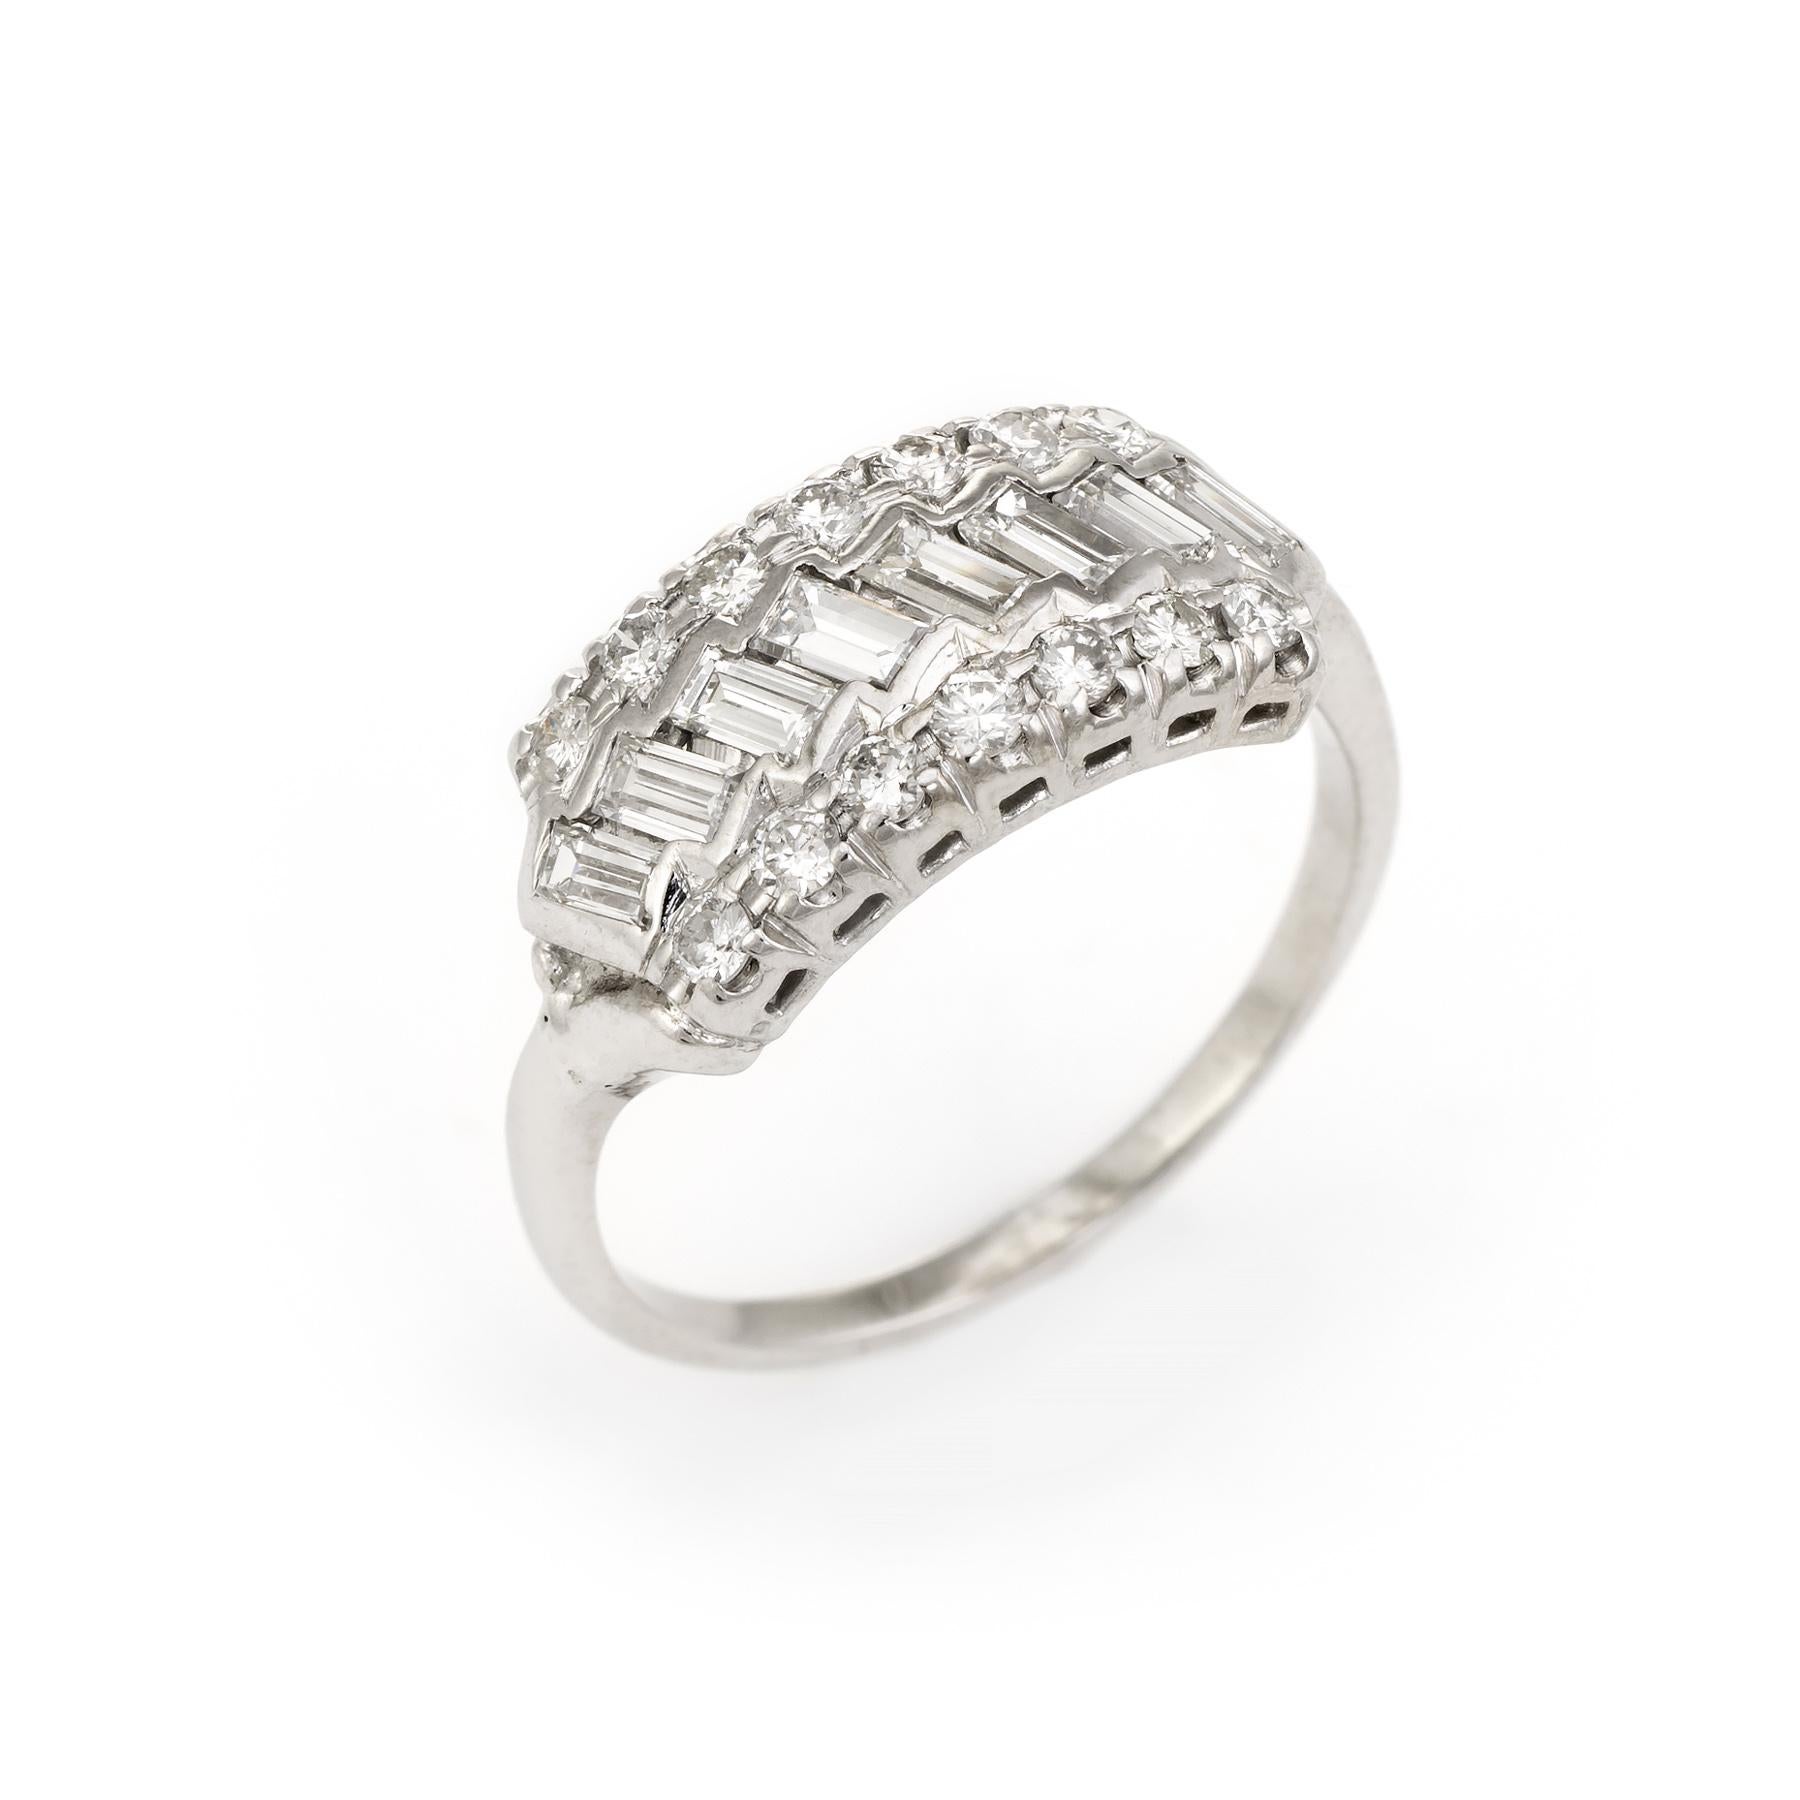 Stylish vintage diamond anniversary ring (circa 1950s to 1960s), crafted in 14 karat white gold. 

Centrally mounted baguette cut diamonds (8) are estimated at estimated 0.07 carats each, accented with 12 estimated 0.03 carat round brilliant cut